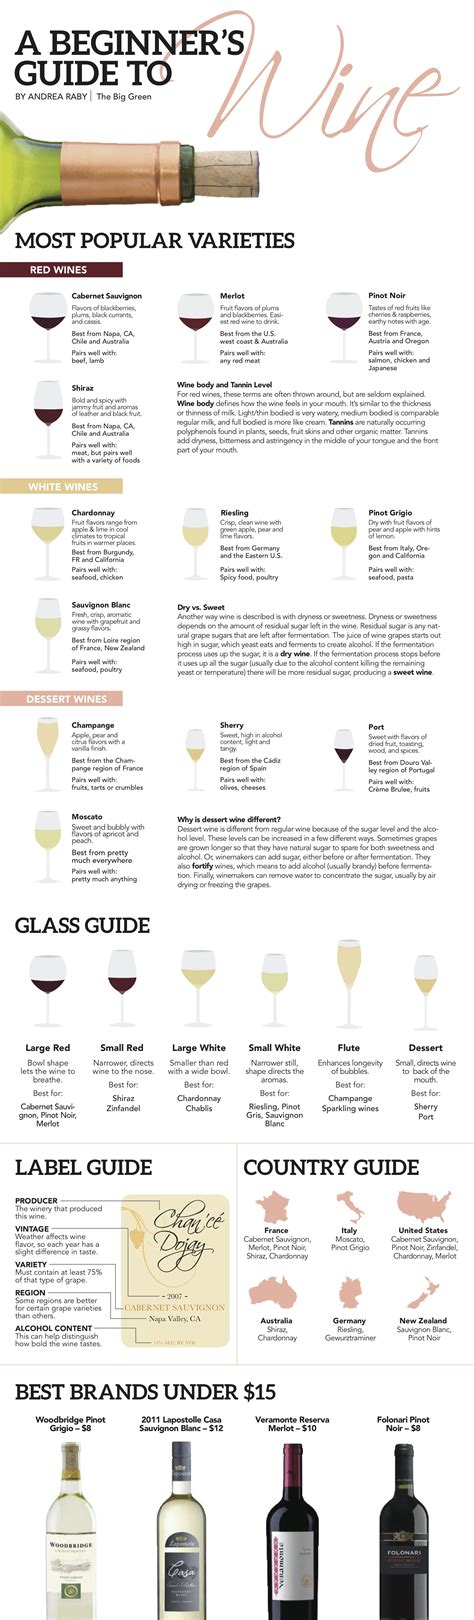 Guide to wine terminology an easy to understand glossary of. - Latin america scavenger hunt study guide.